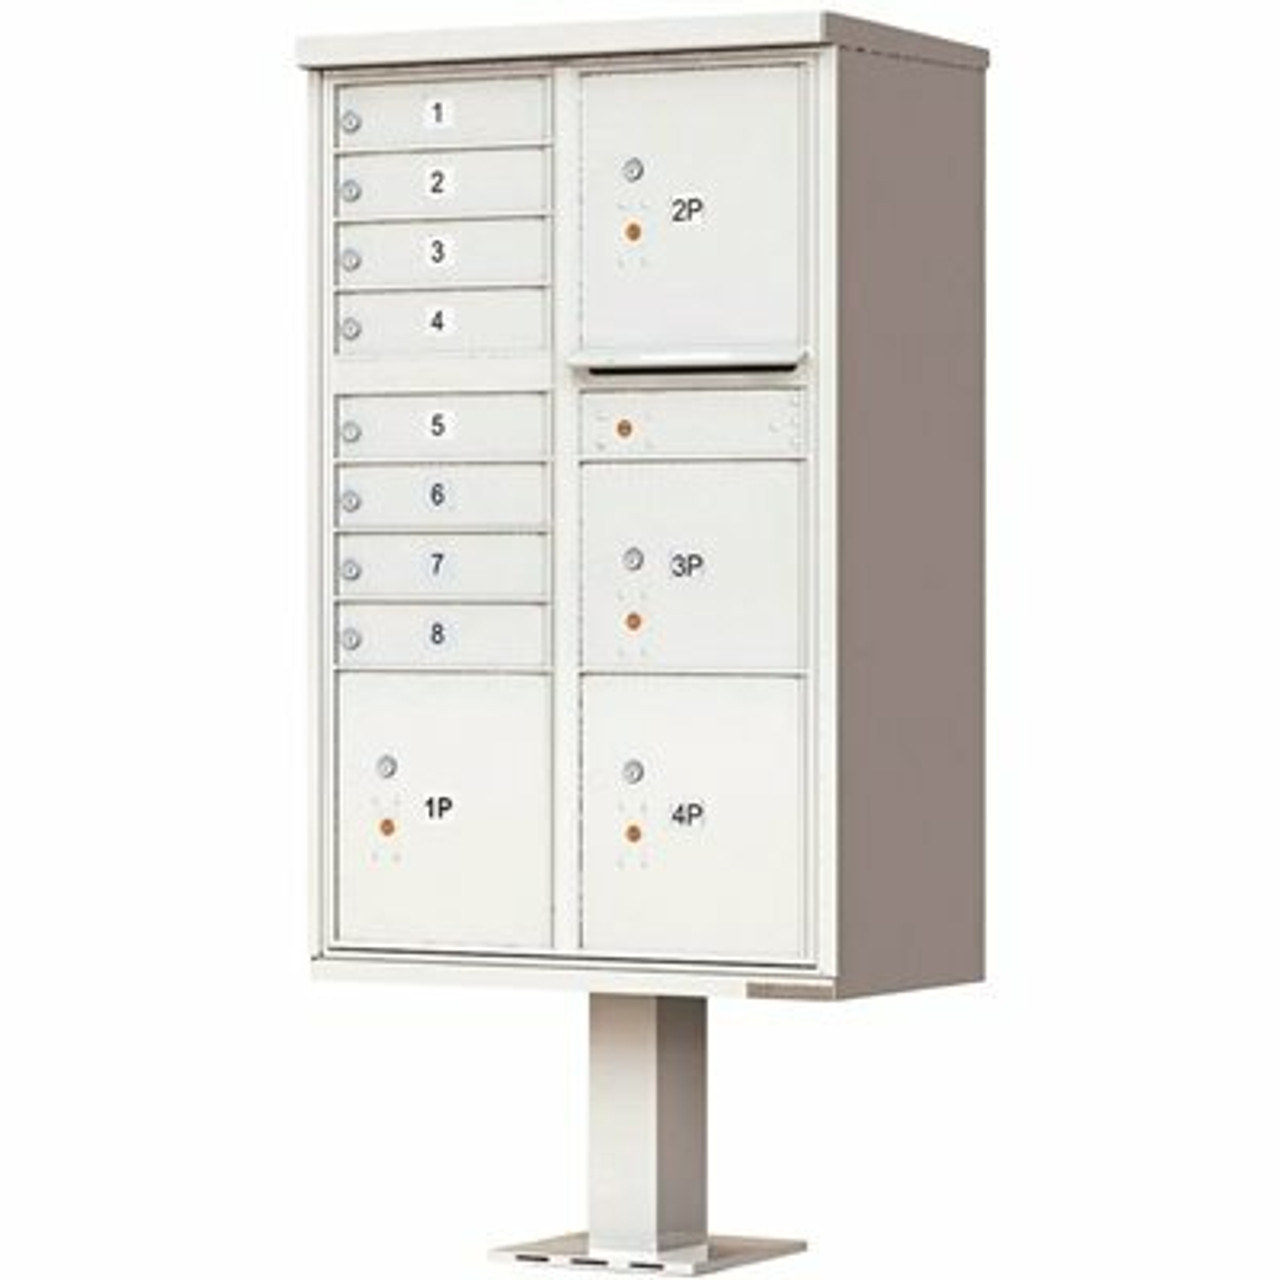 Florence 1570 Series 8-Mailboxes, 1-Outgoing Compartment, 4-Parcel Lockers, Vital Cluster Box Unit - 2474376